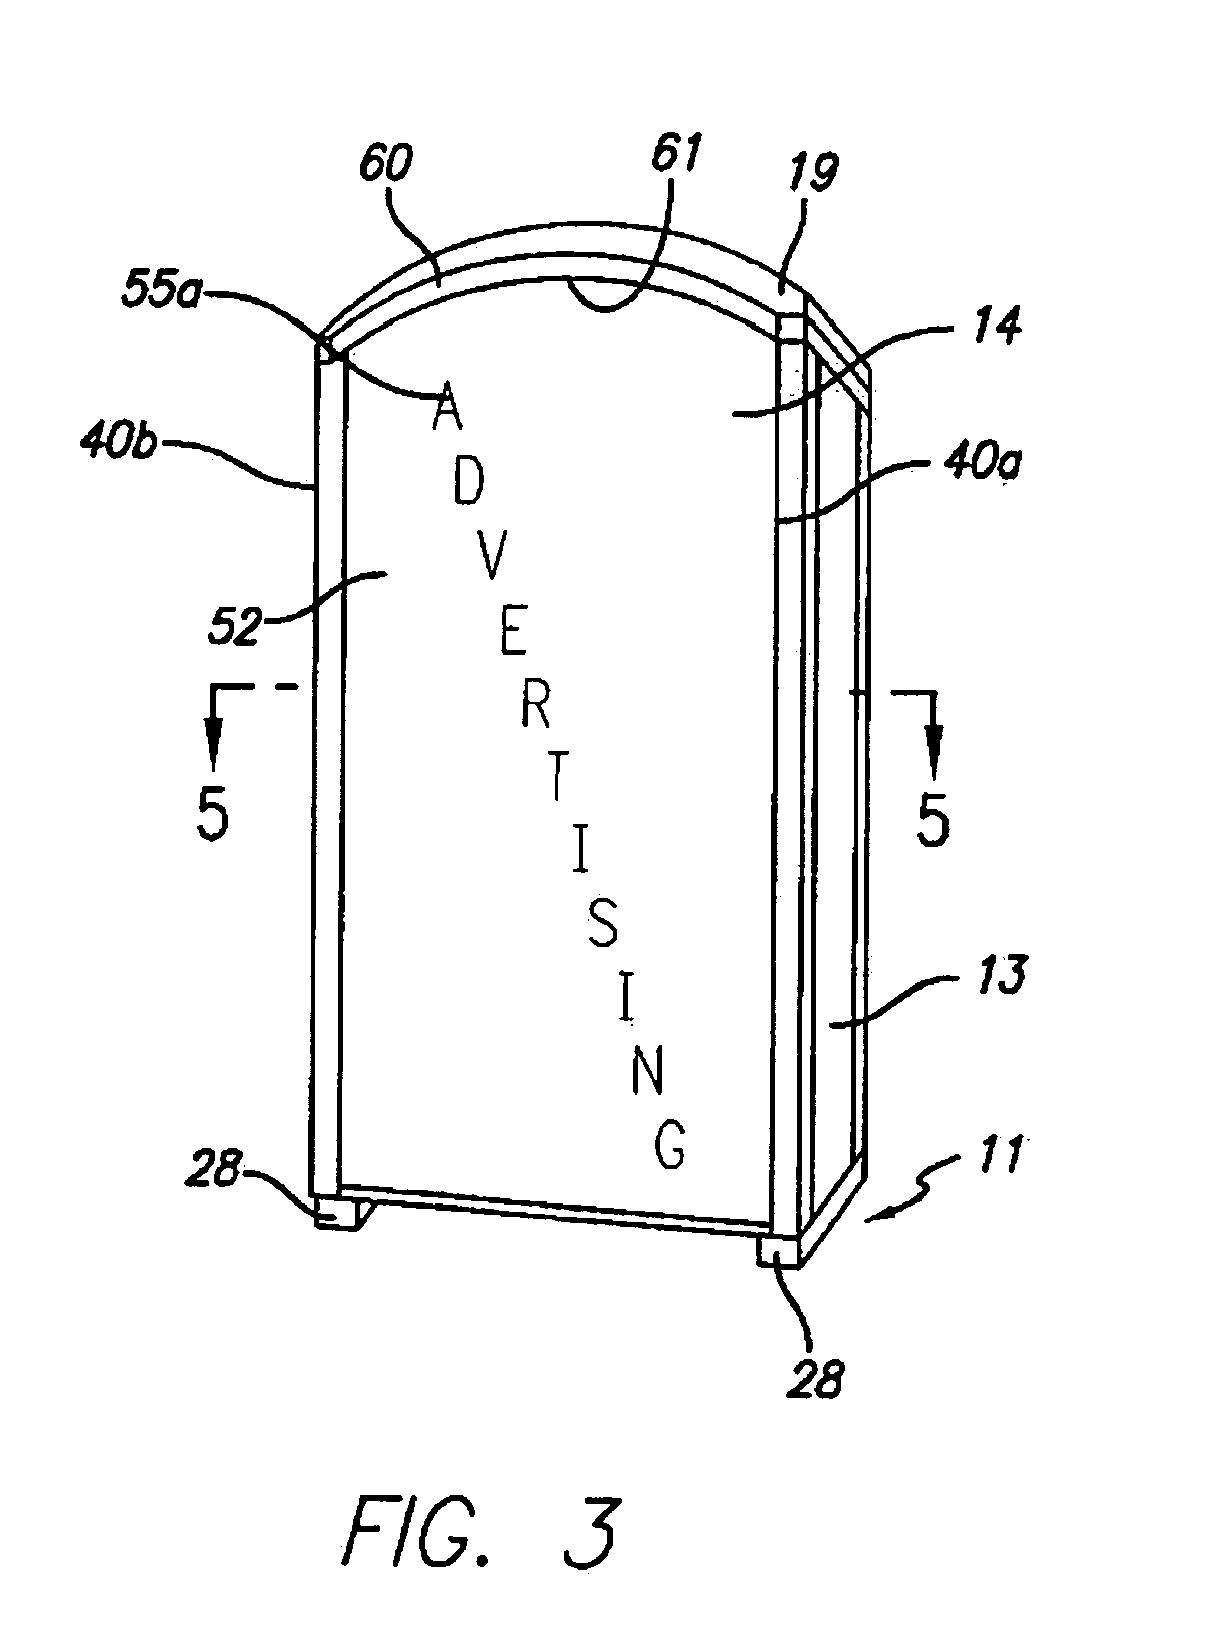 Improved portable restroom structure, component parts and method of